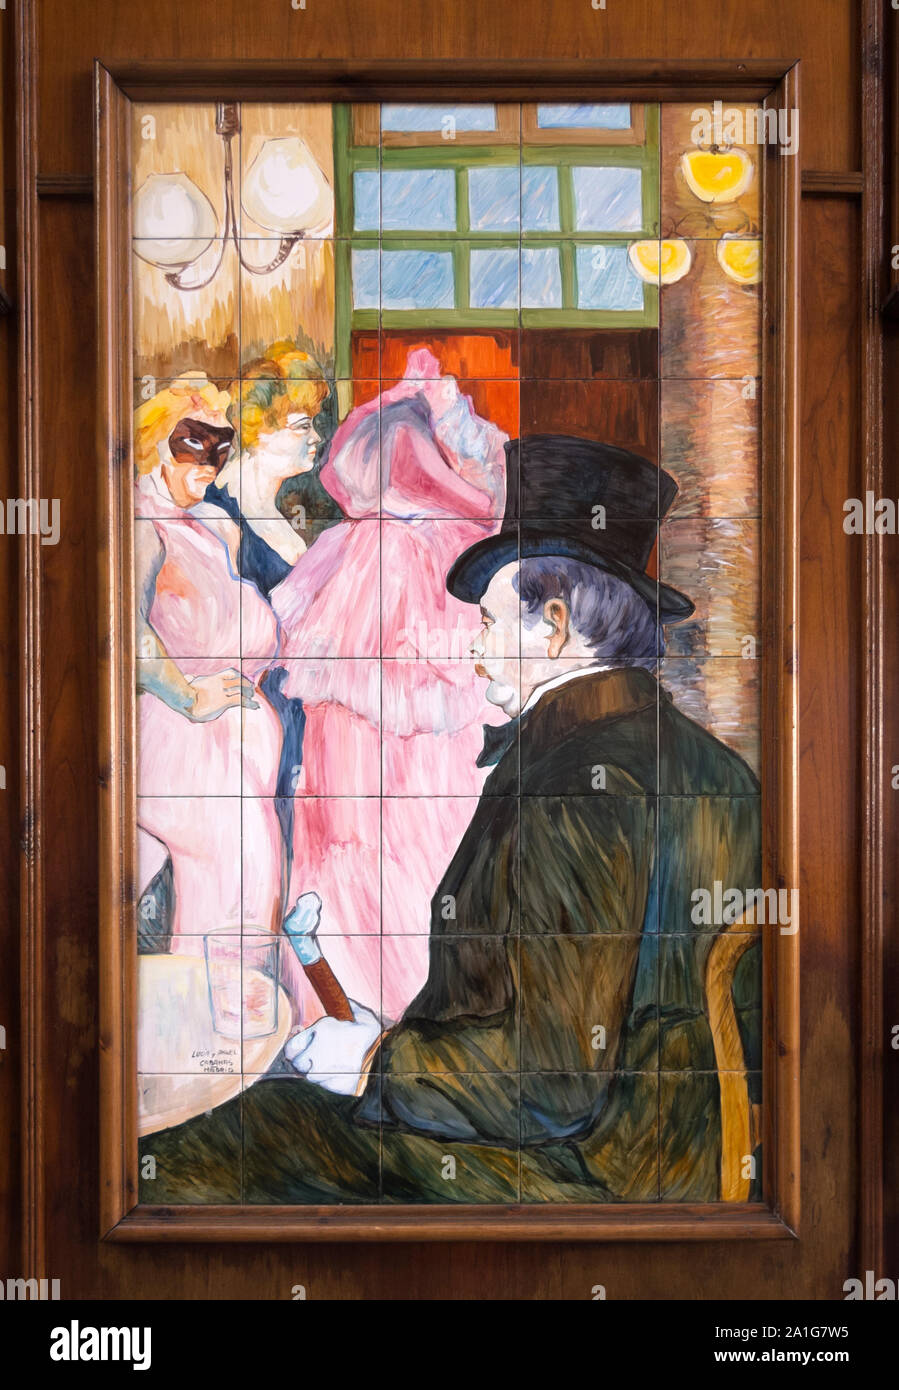 MADRID – FEB 23: Mosaic of Toulouse Lautrec on February 23, 2013 in Madrid, Spain. Mosaic on the facade of a cafe in Madrid 1864, inspired by a painti Stock Photo